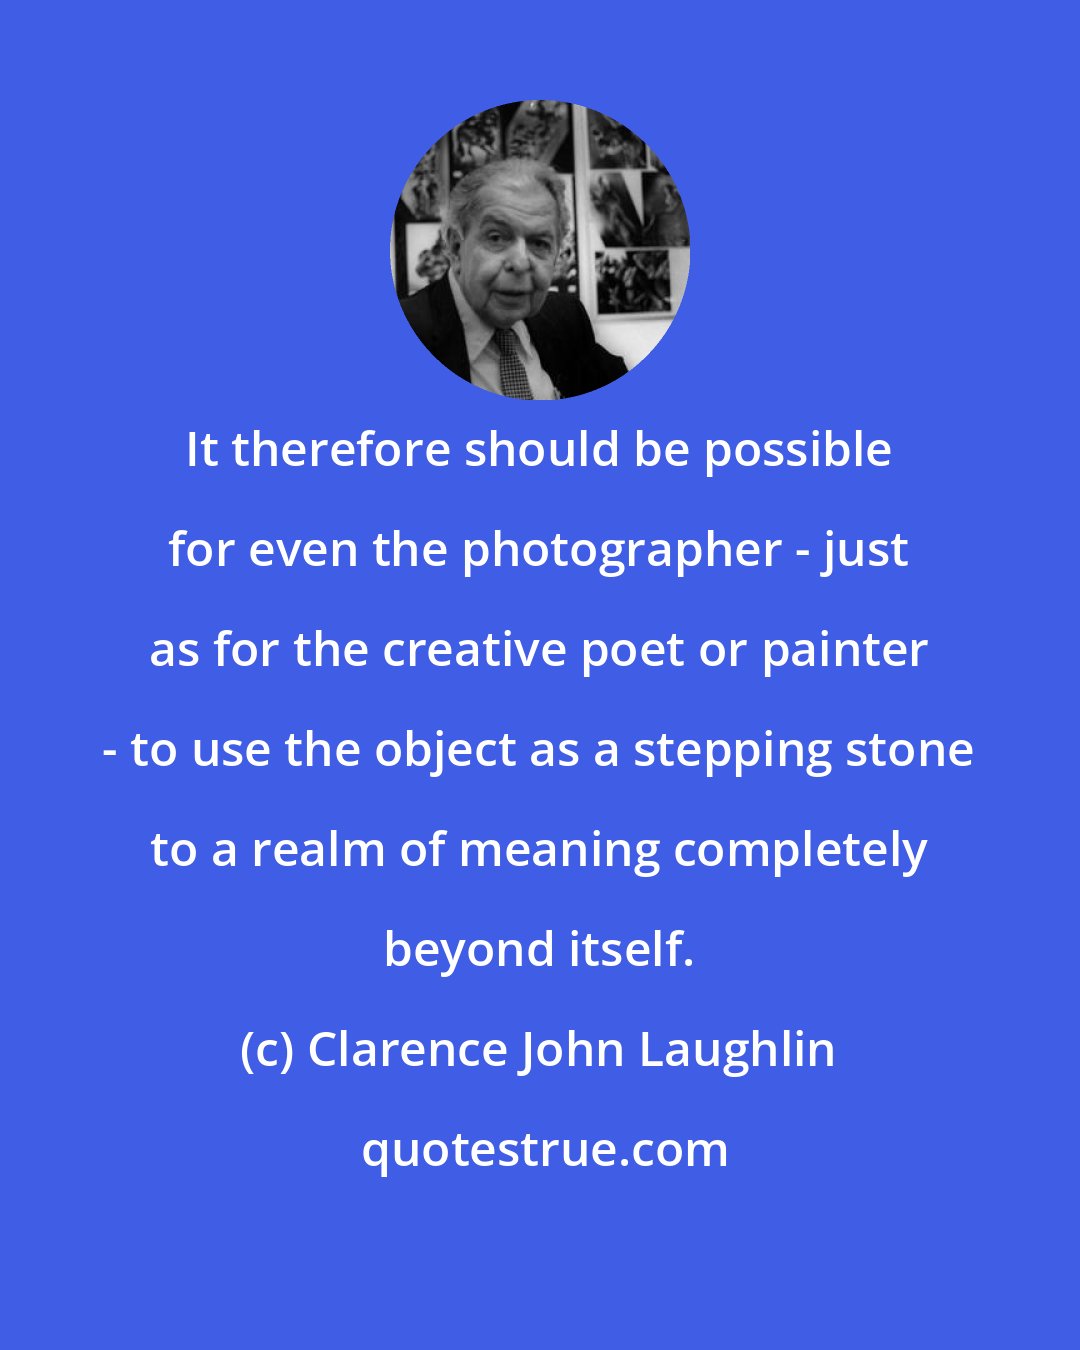 Clarence John Laughlin: It therefore should be possible for even the photographer - just as for the creative poet or painter - to use the object as a stepping stone to a realm of meaning completely beyond itself.